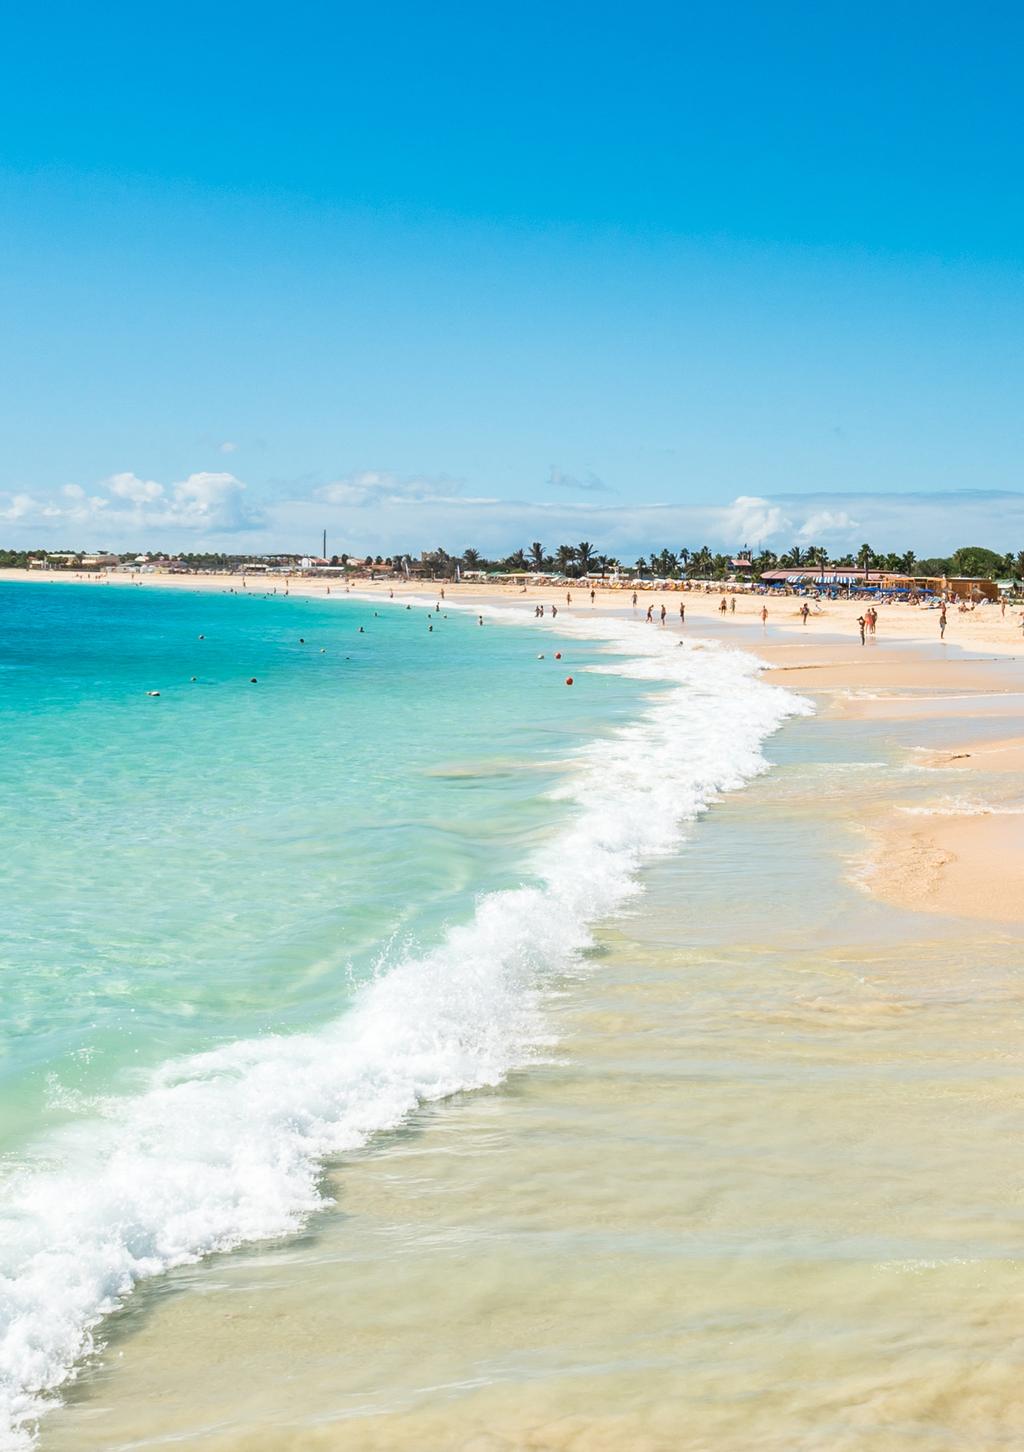 Cape Verde Market Report - February 2018 Taking into account the numerous resort and hotel development projects in Boa Vista, this island is expected to grow as a major leisure market for leisure